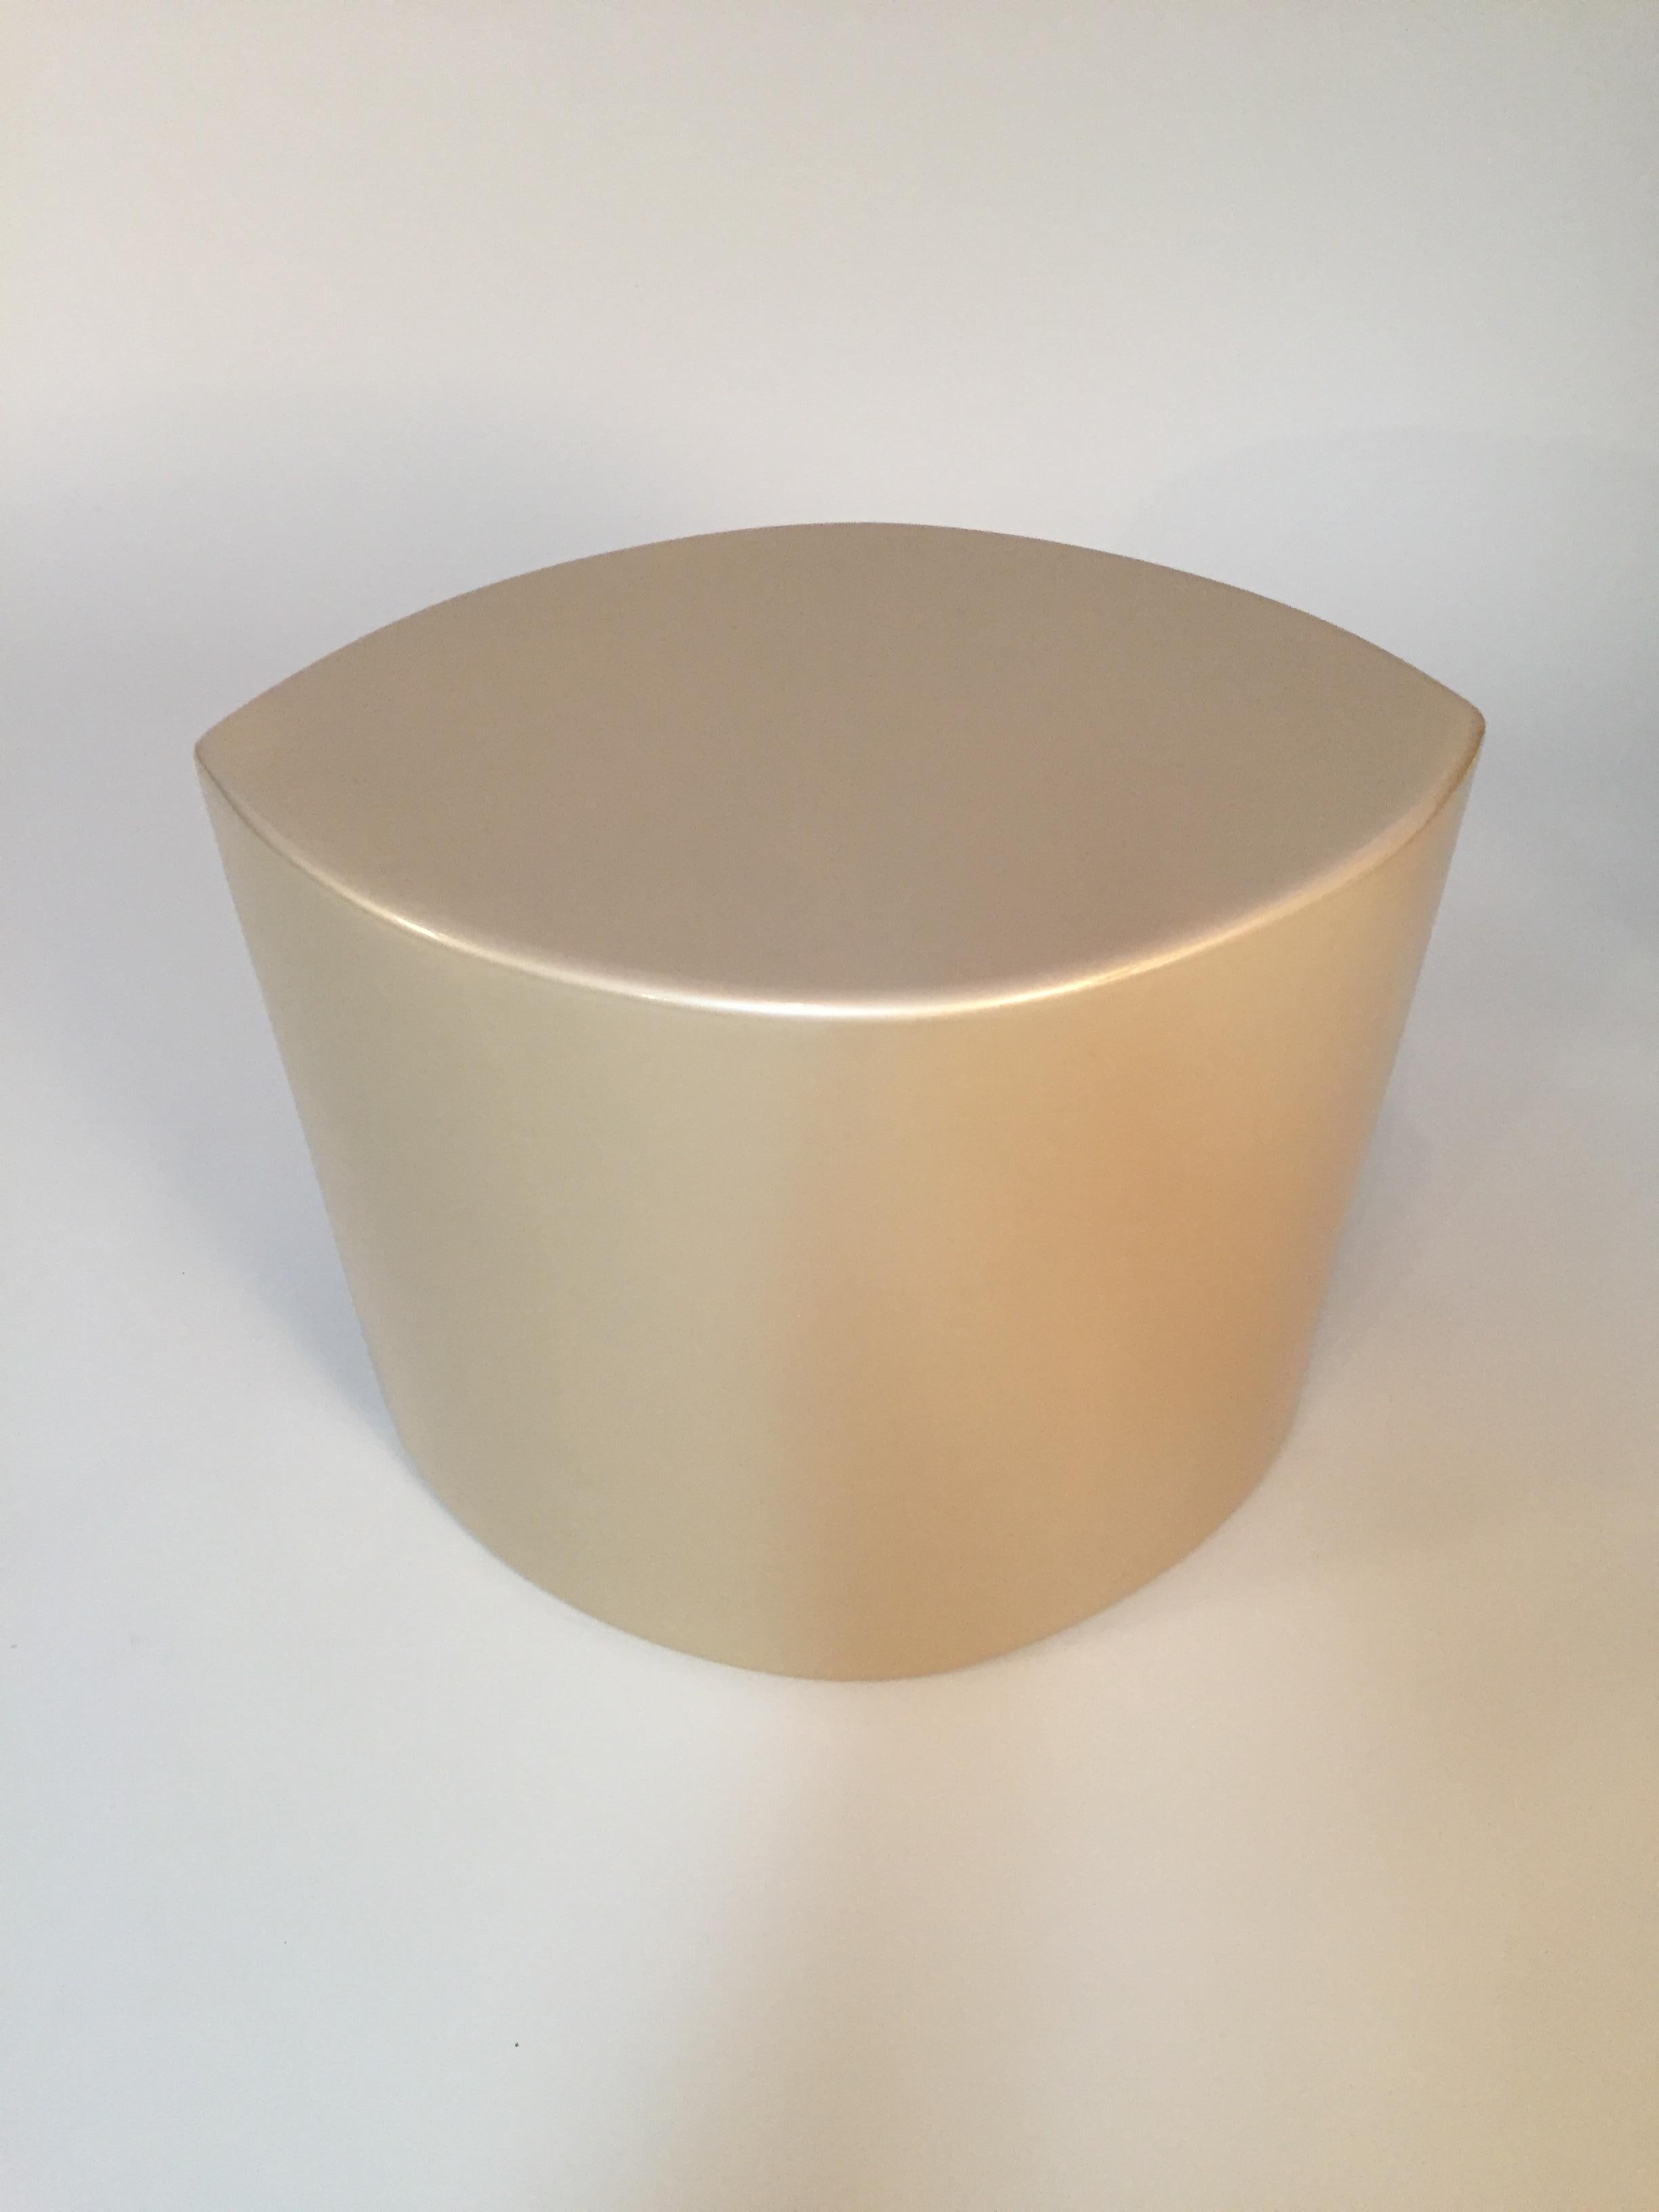 Metallic Gold Gloss Lacquer Side Table Seat In Excellent Condition For Sale In Daly City, CA